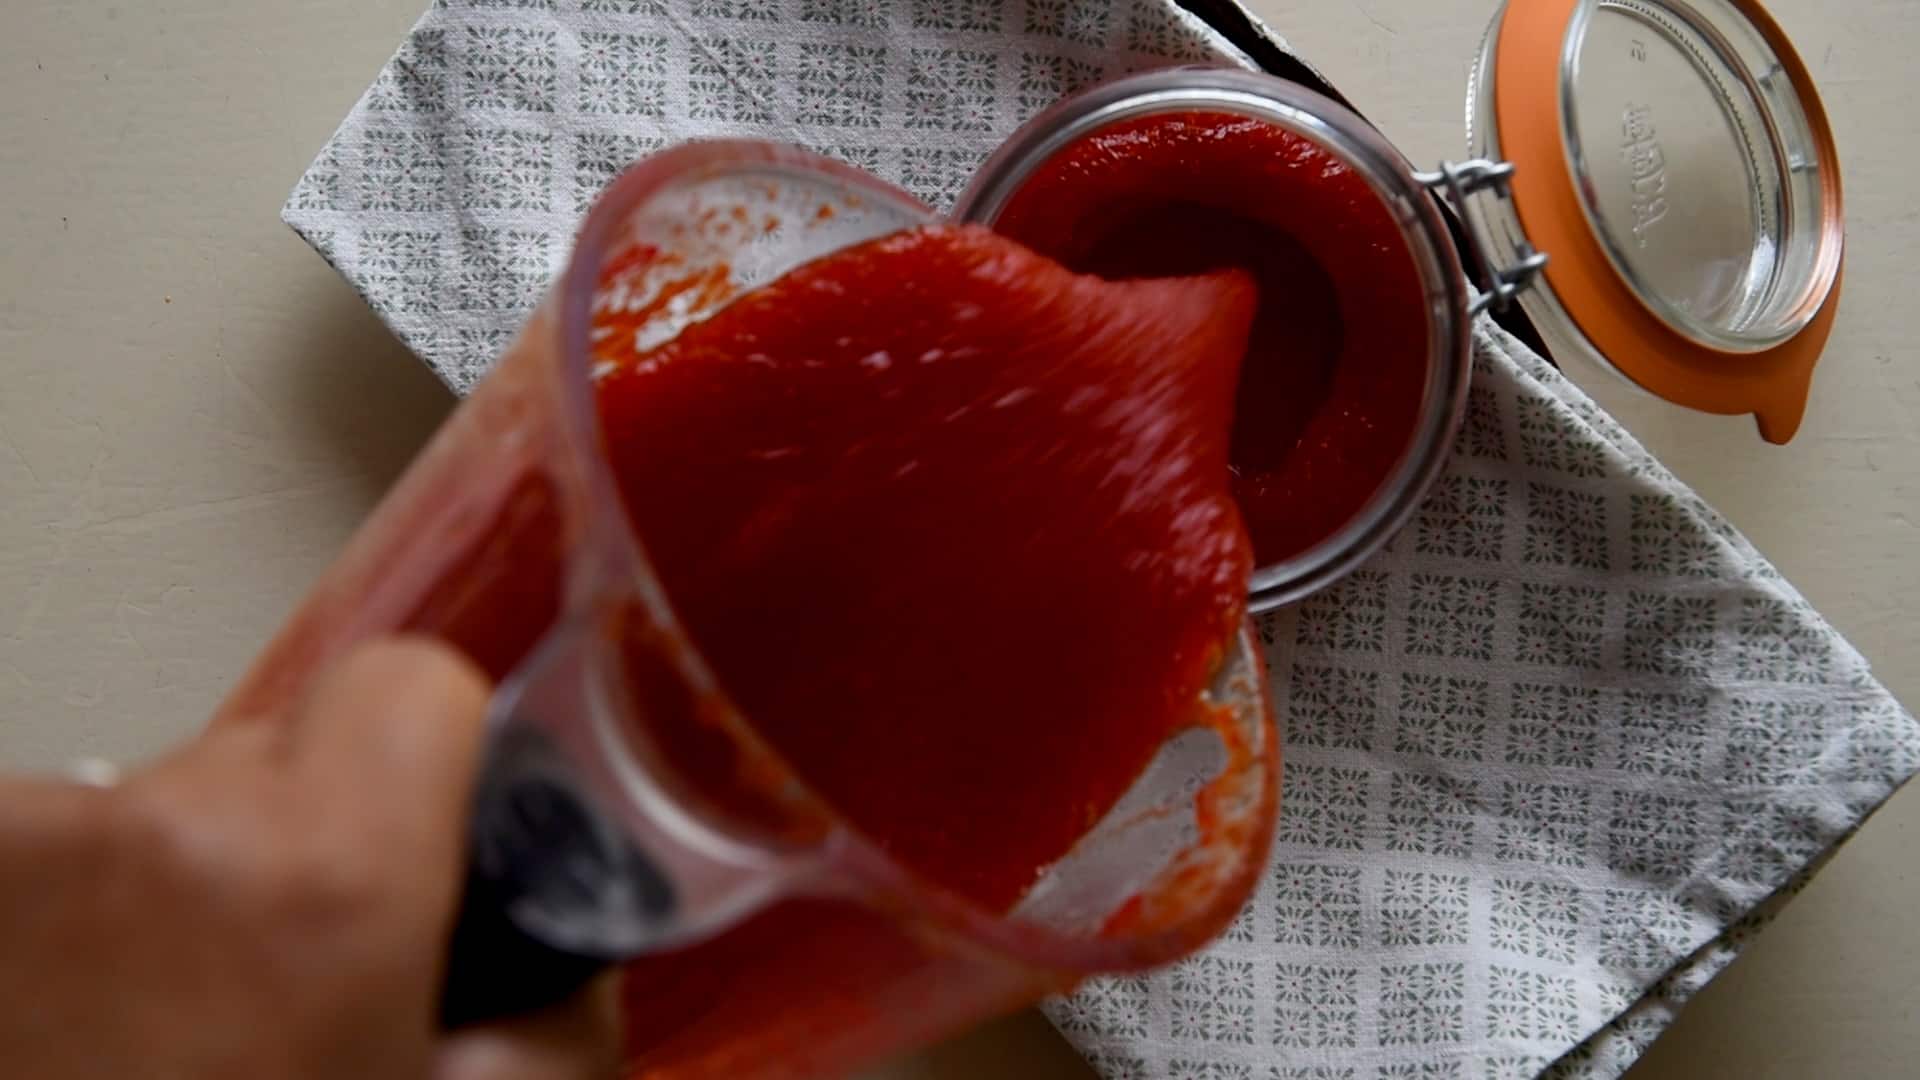 Pouring the jelly into a jar